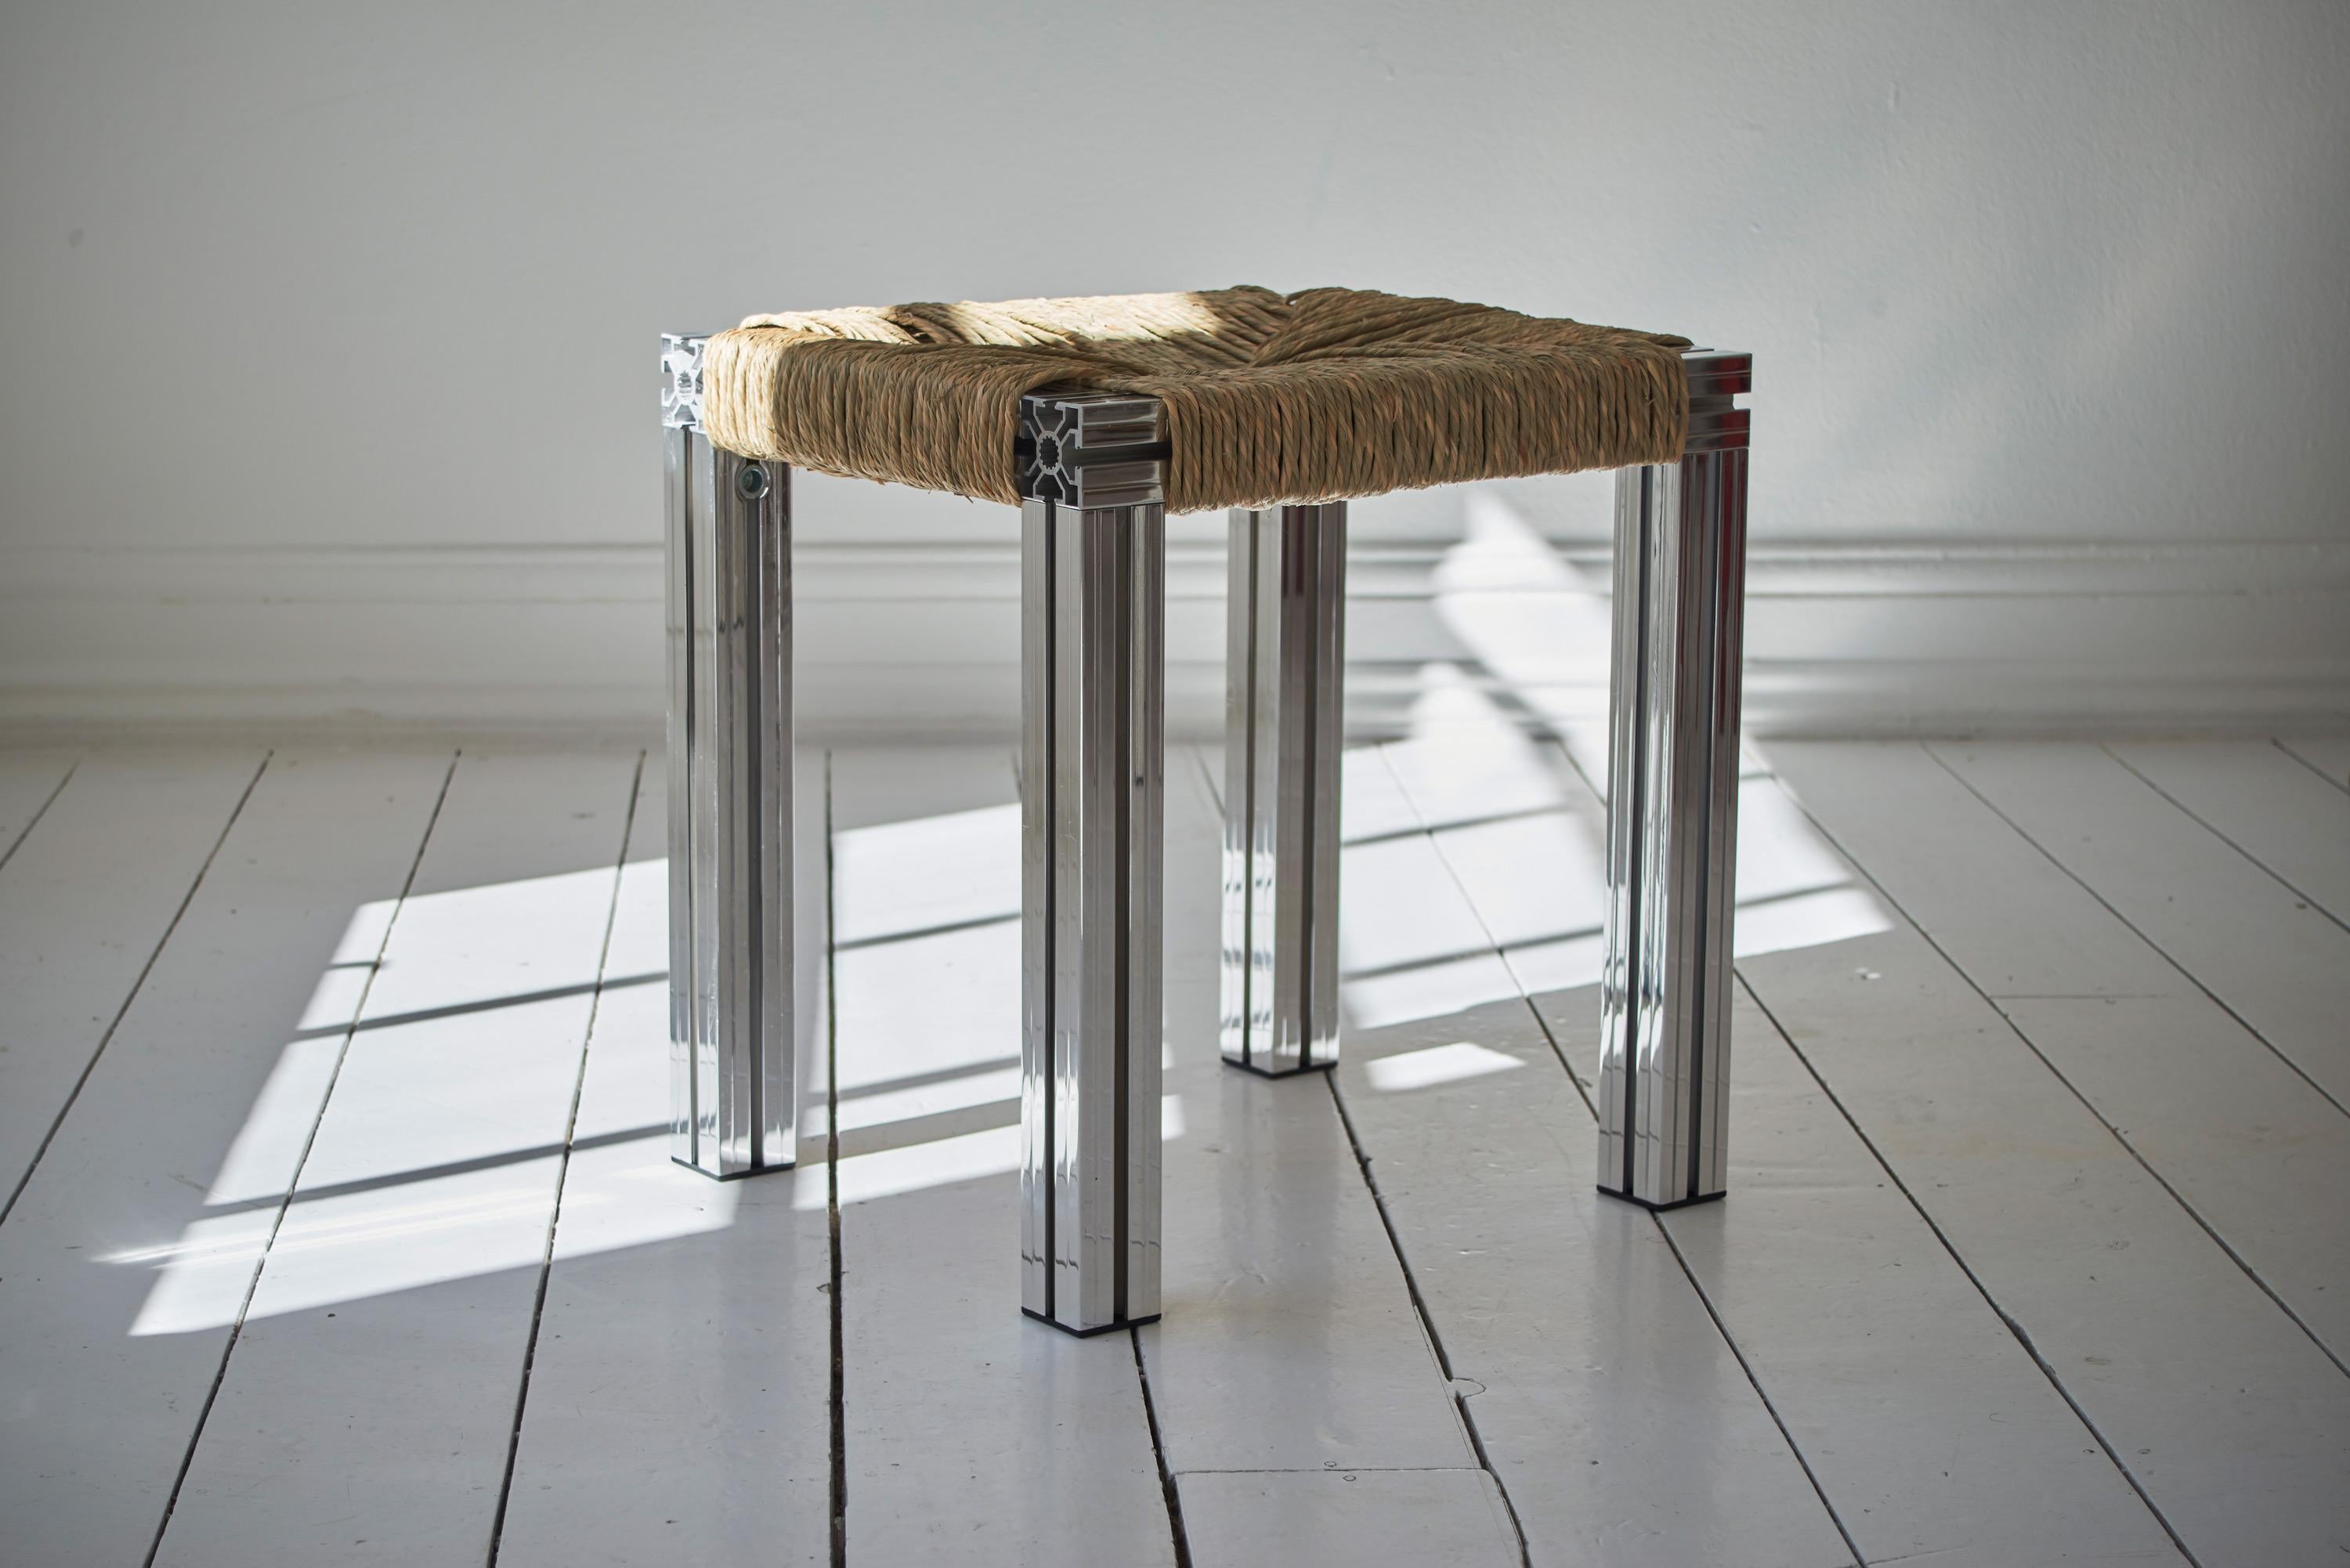 British Polished Aluminium Stool with Reel Rush Seating from Anodised Wicker Collection For Sale